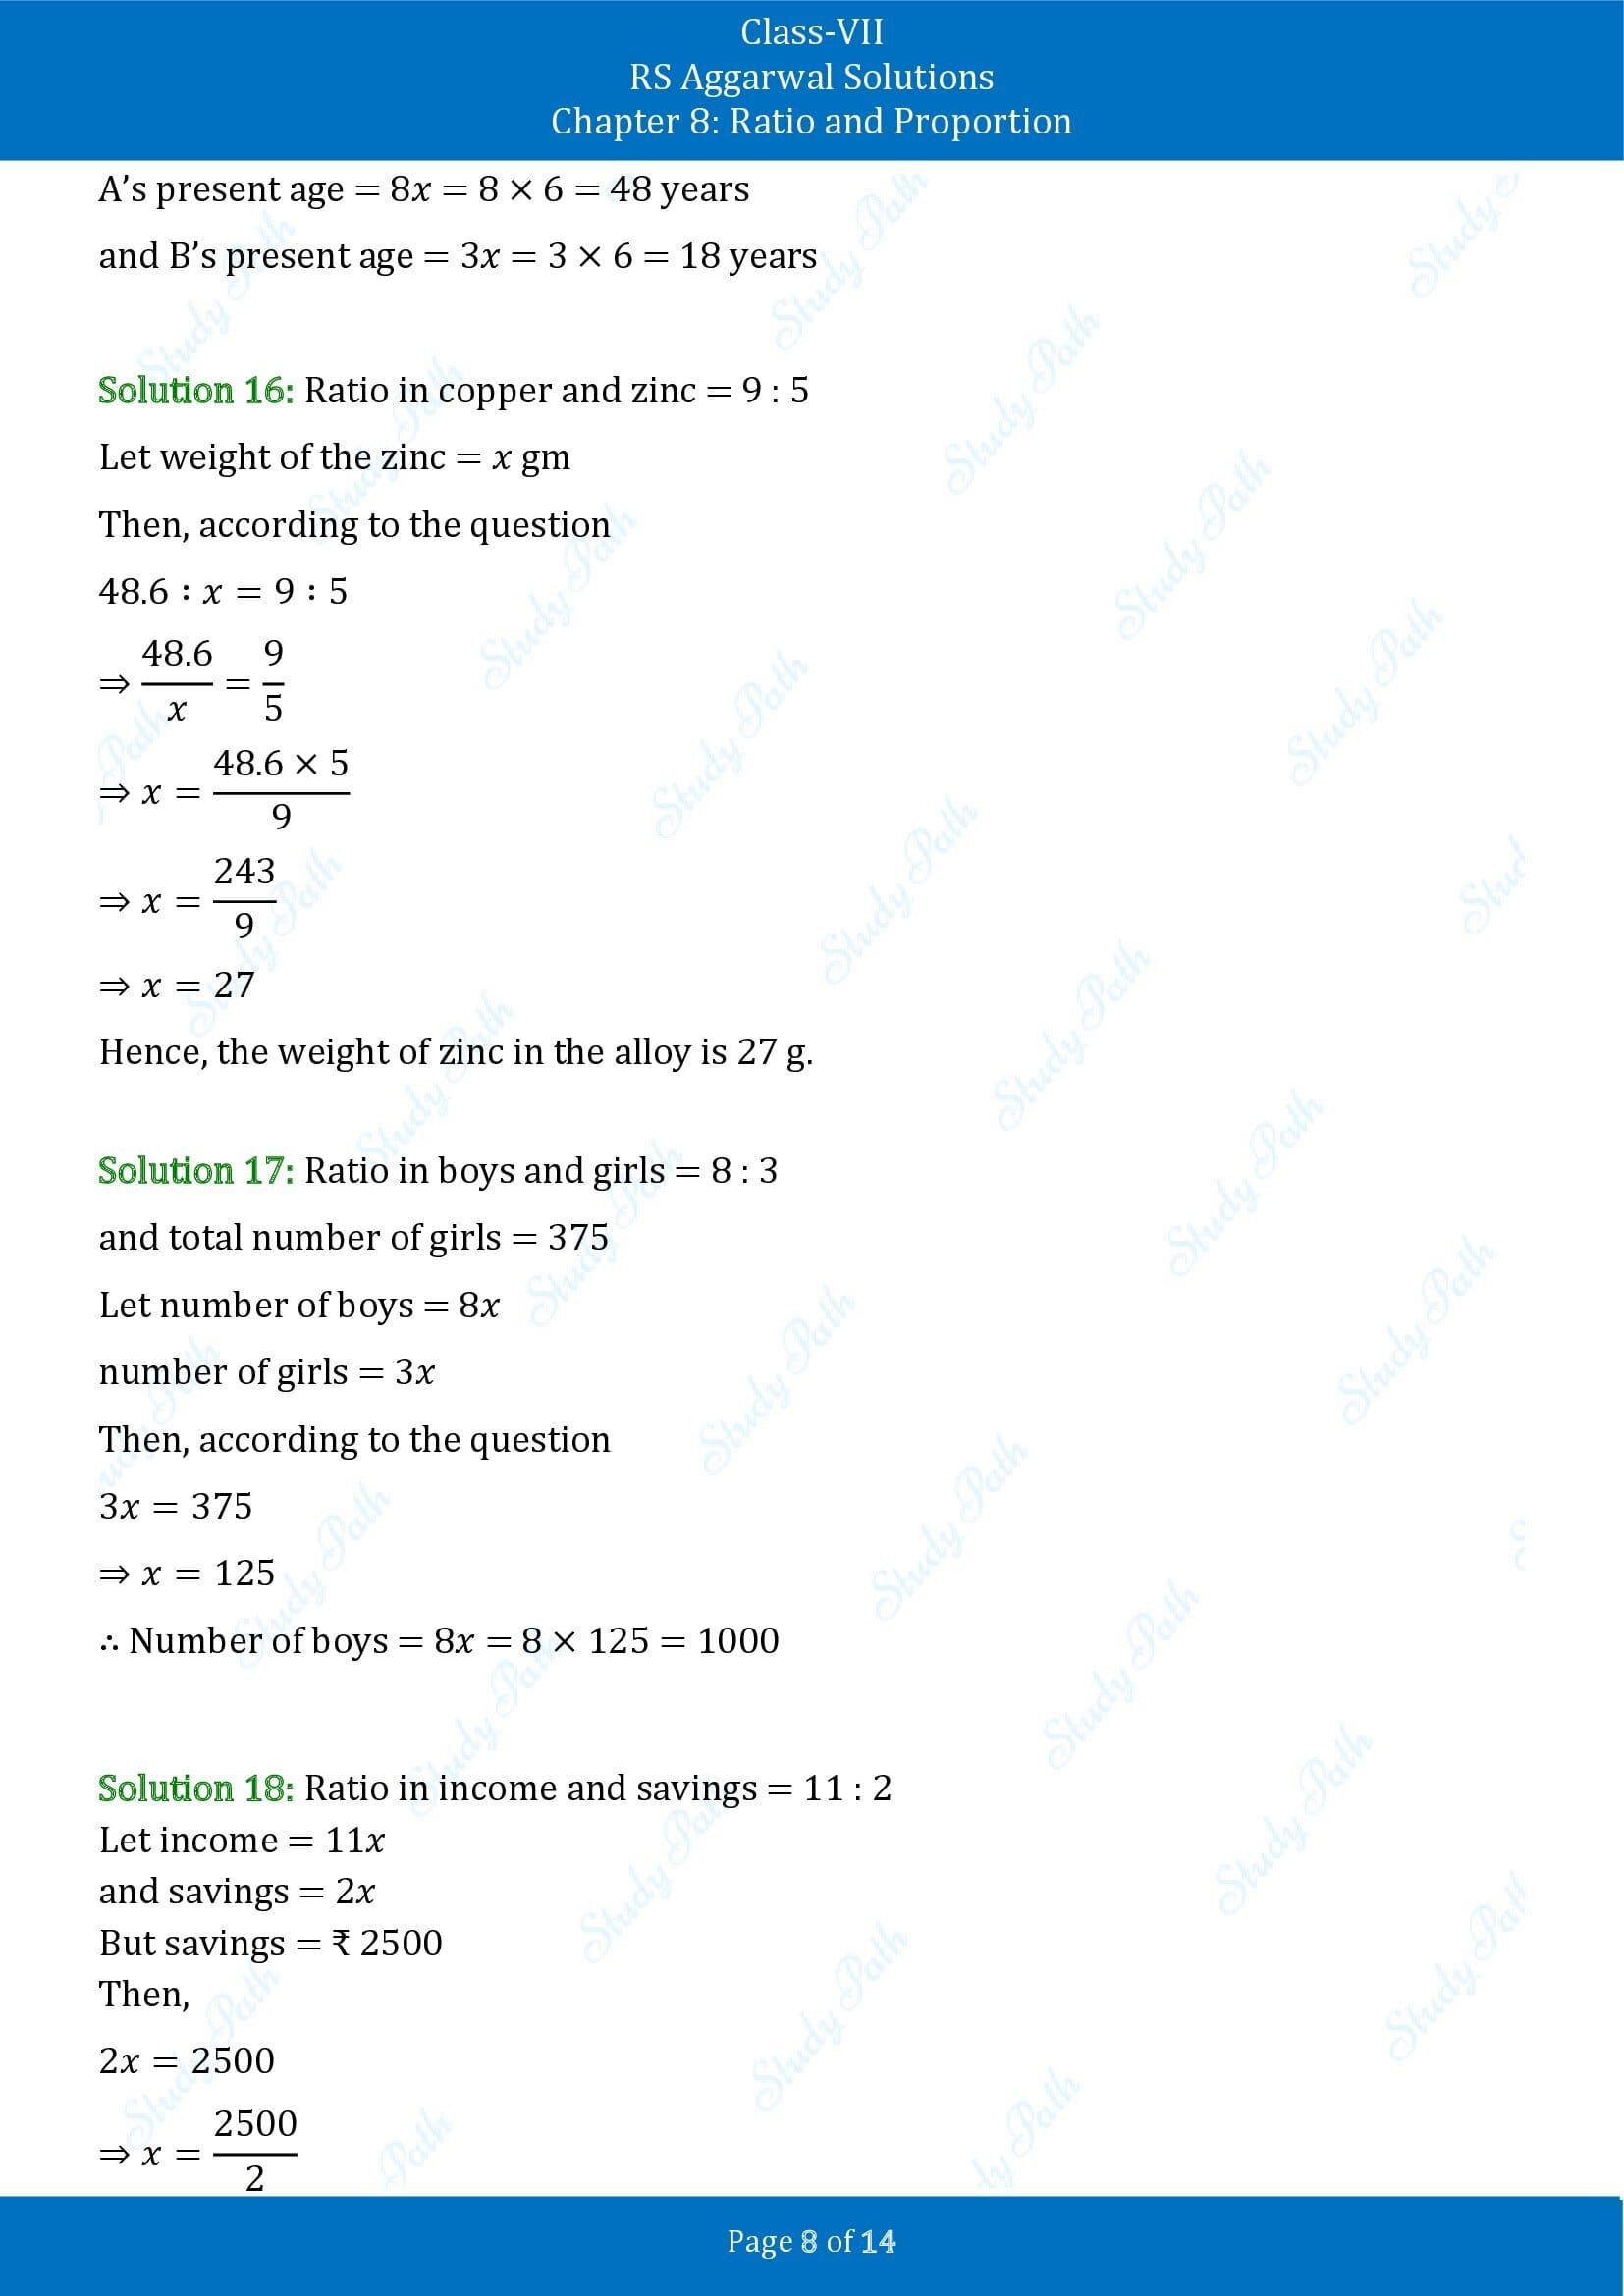 RS Aggarwal Solutions Class 7 Chapter 8 Ratio and Proportion Exercise 8A 00008